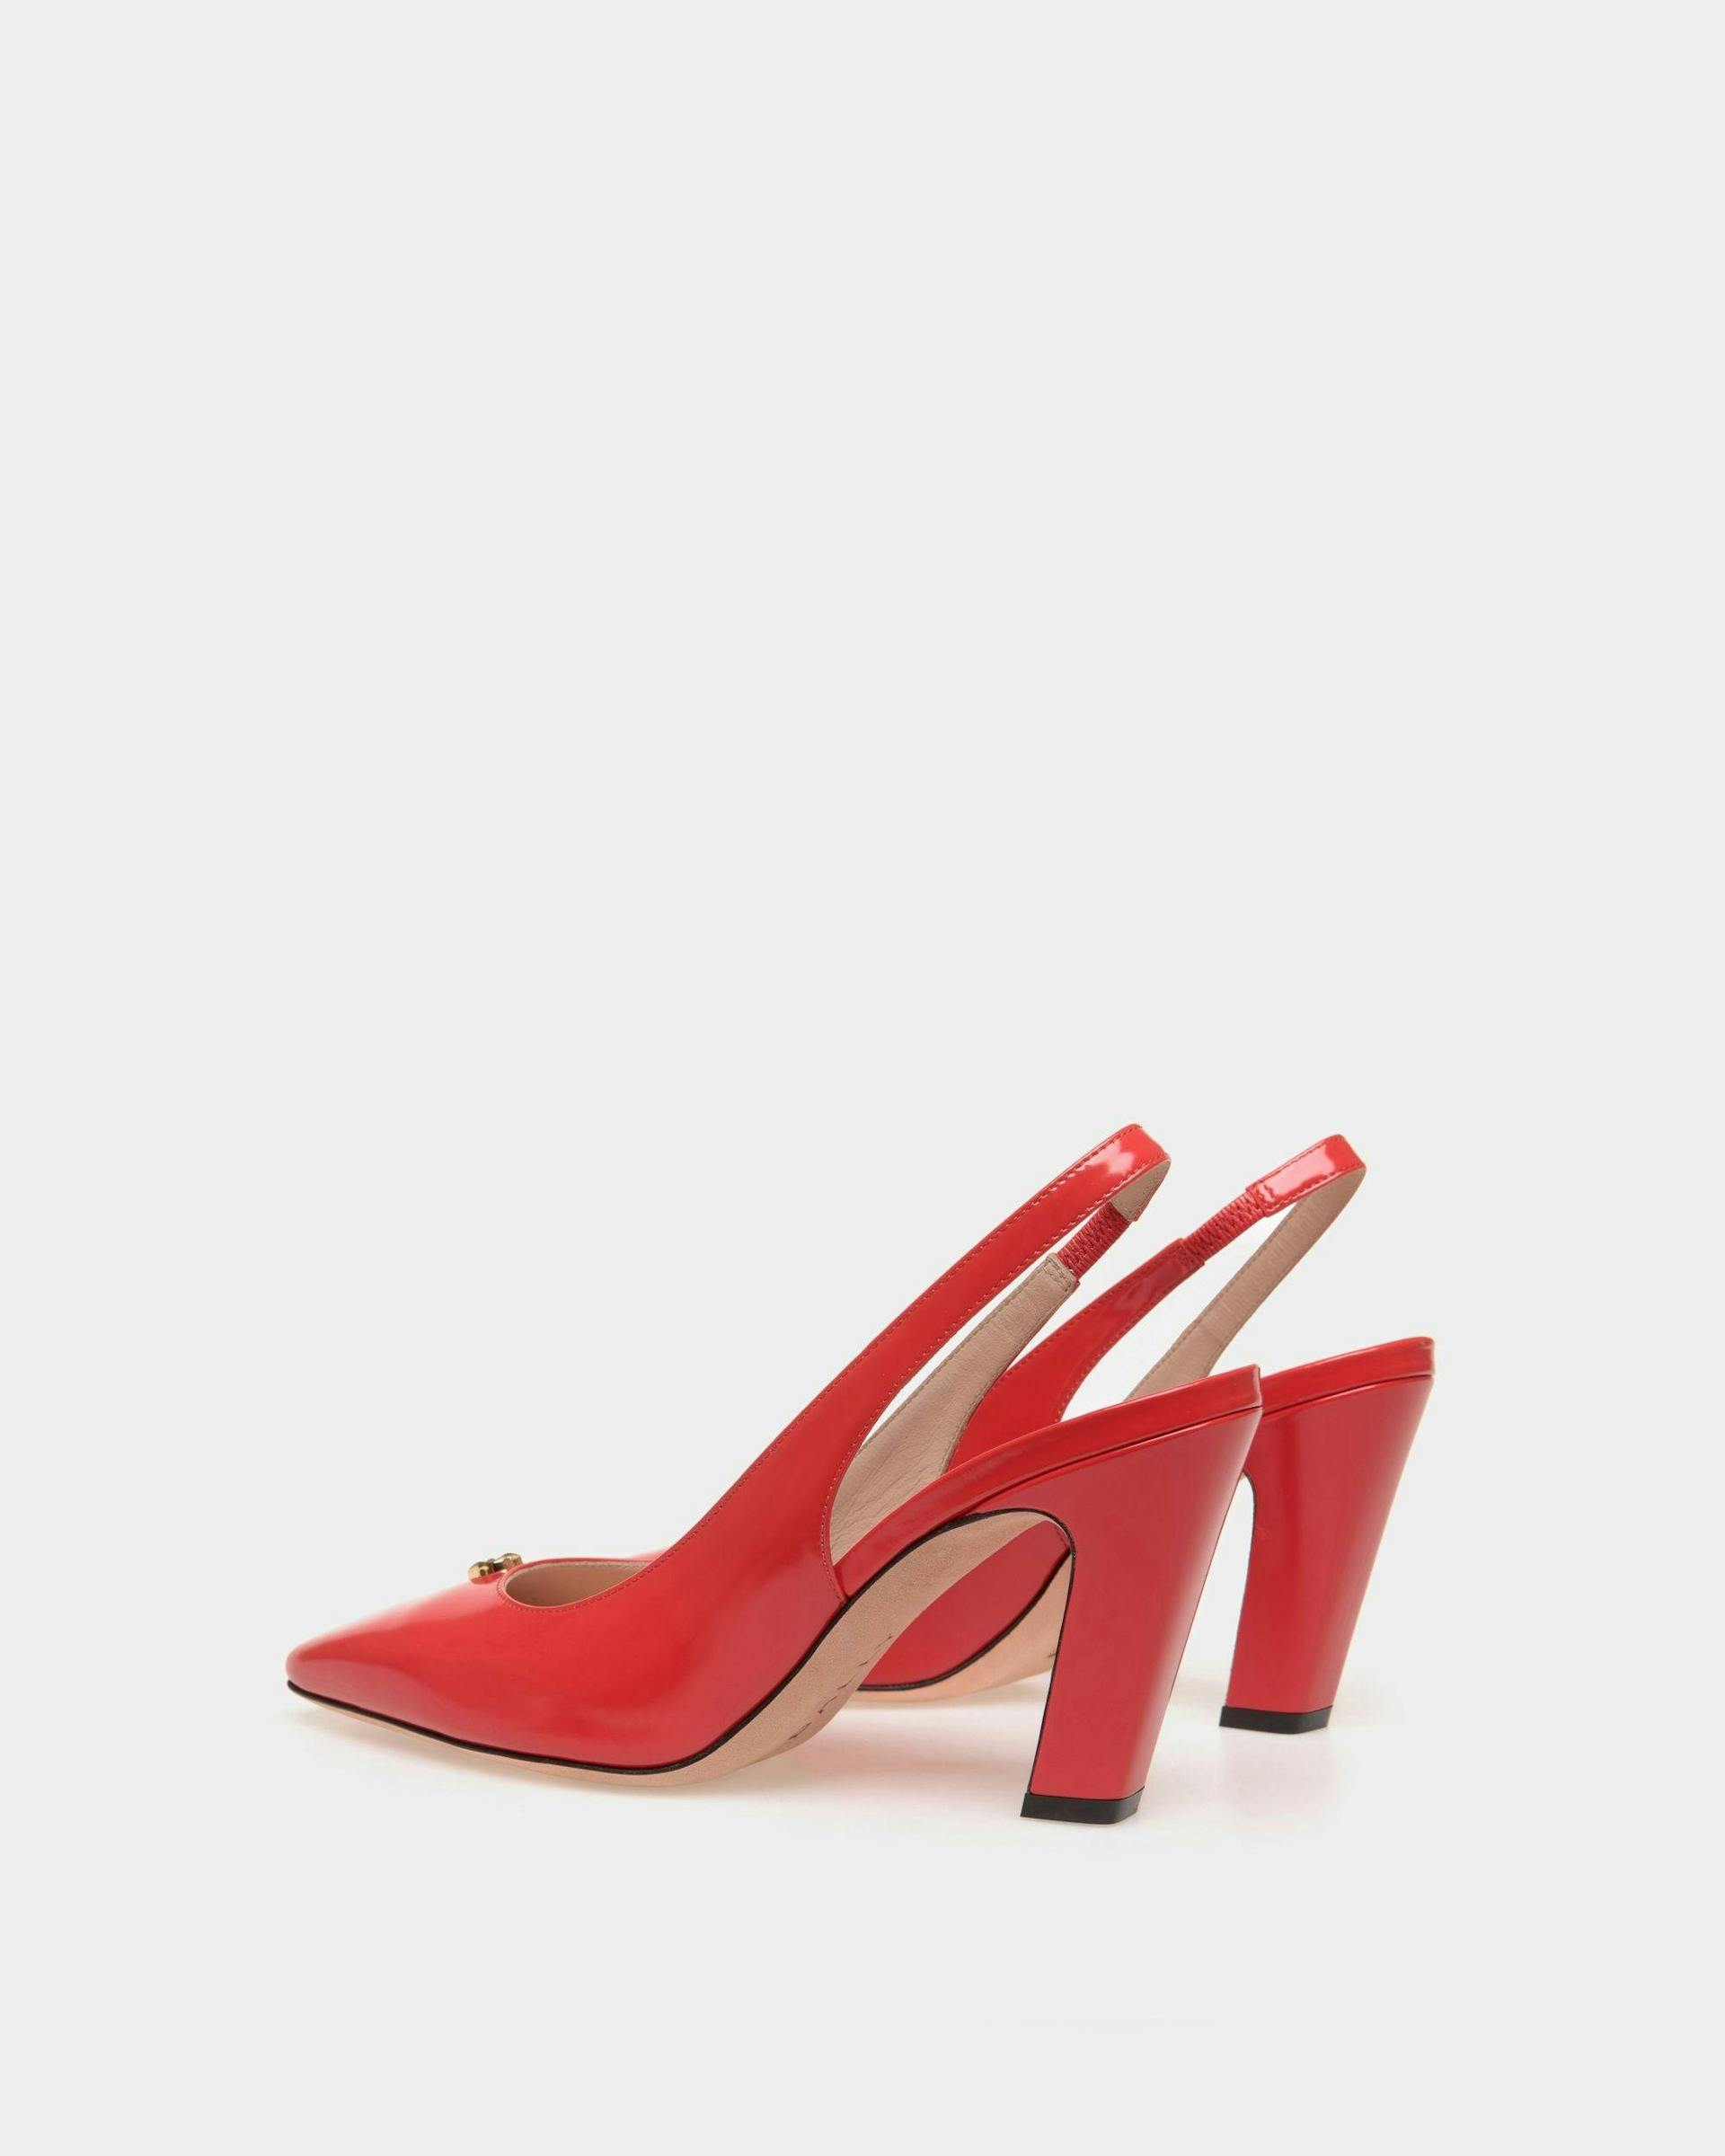 Women's Sylt Slingback Pump In Red Leather | Bally | Still Life 3/4 Back